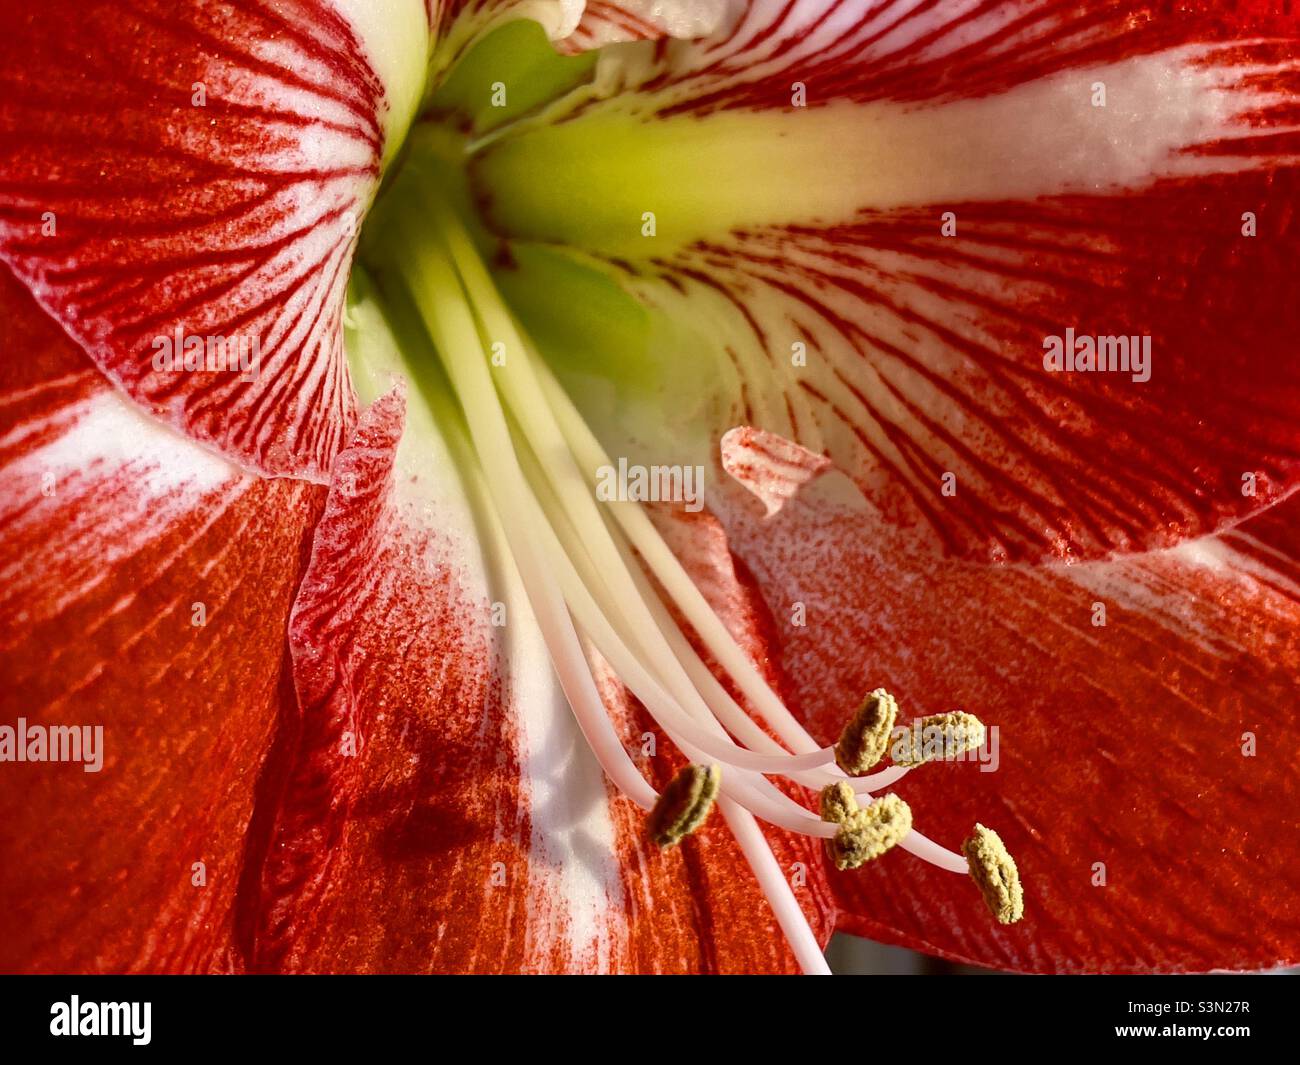 A detail of a red Amaryllis flower showing the streaked petals and the stamens Stock Photo